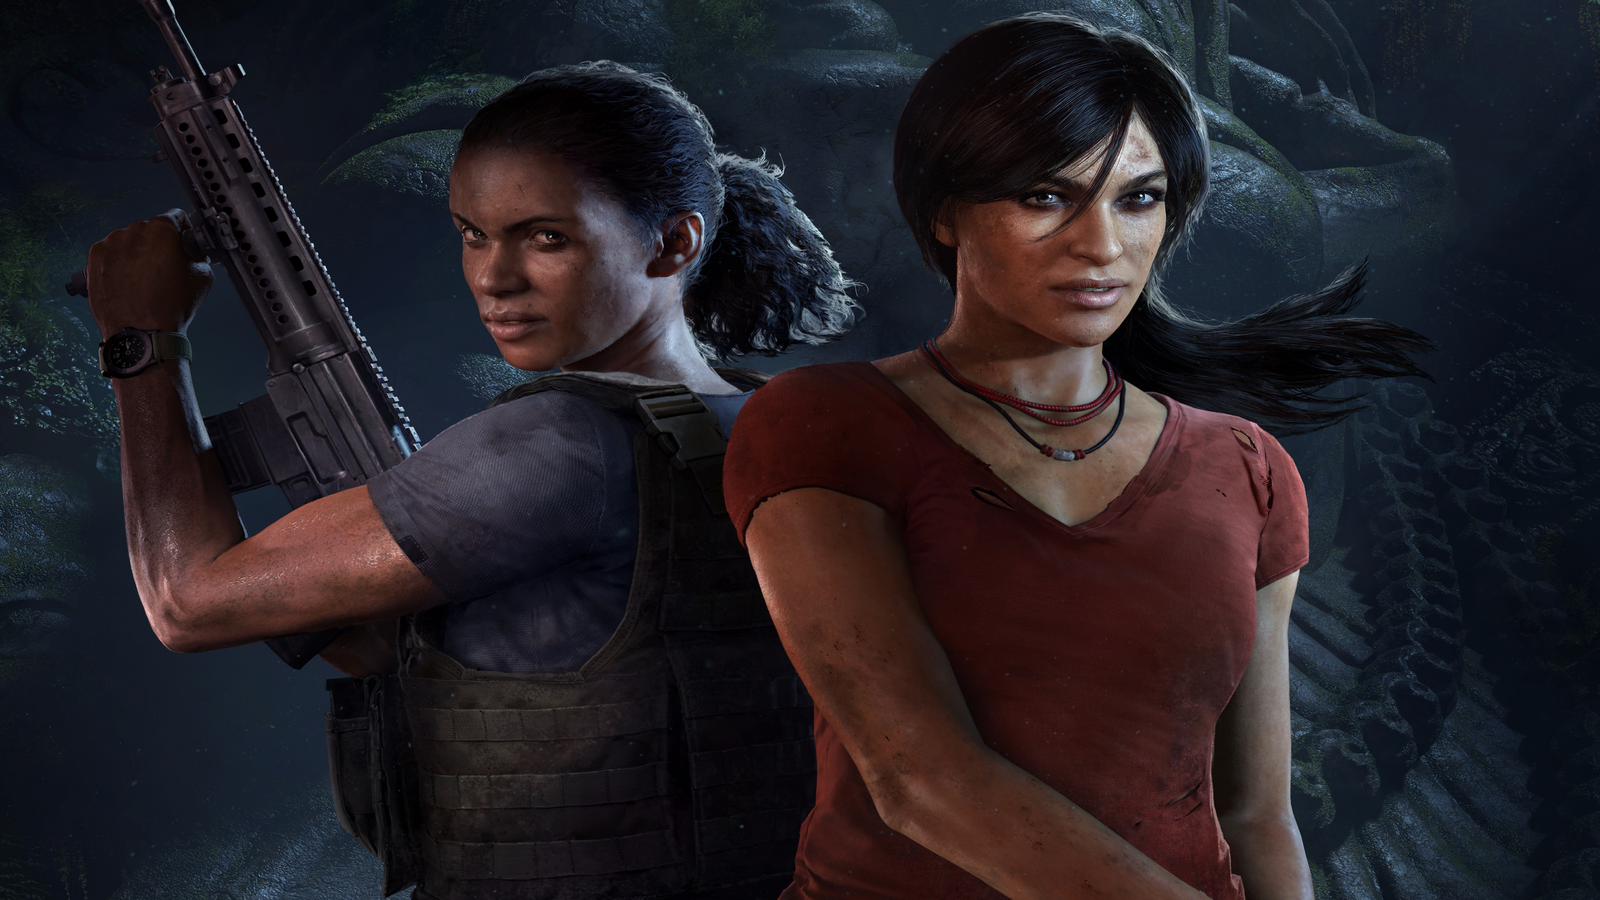 Uncharted: The Lost Legacy - Reviews